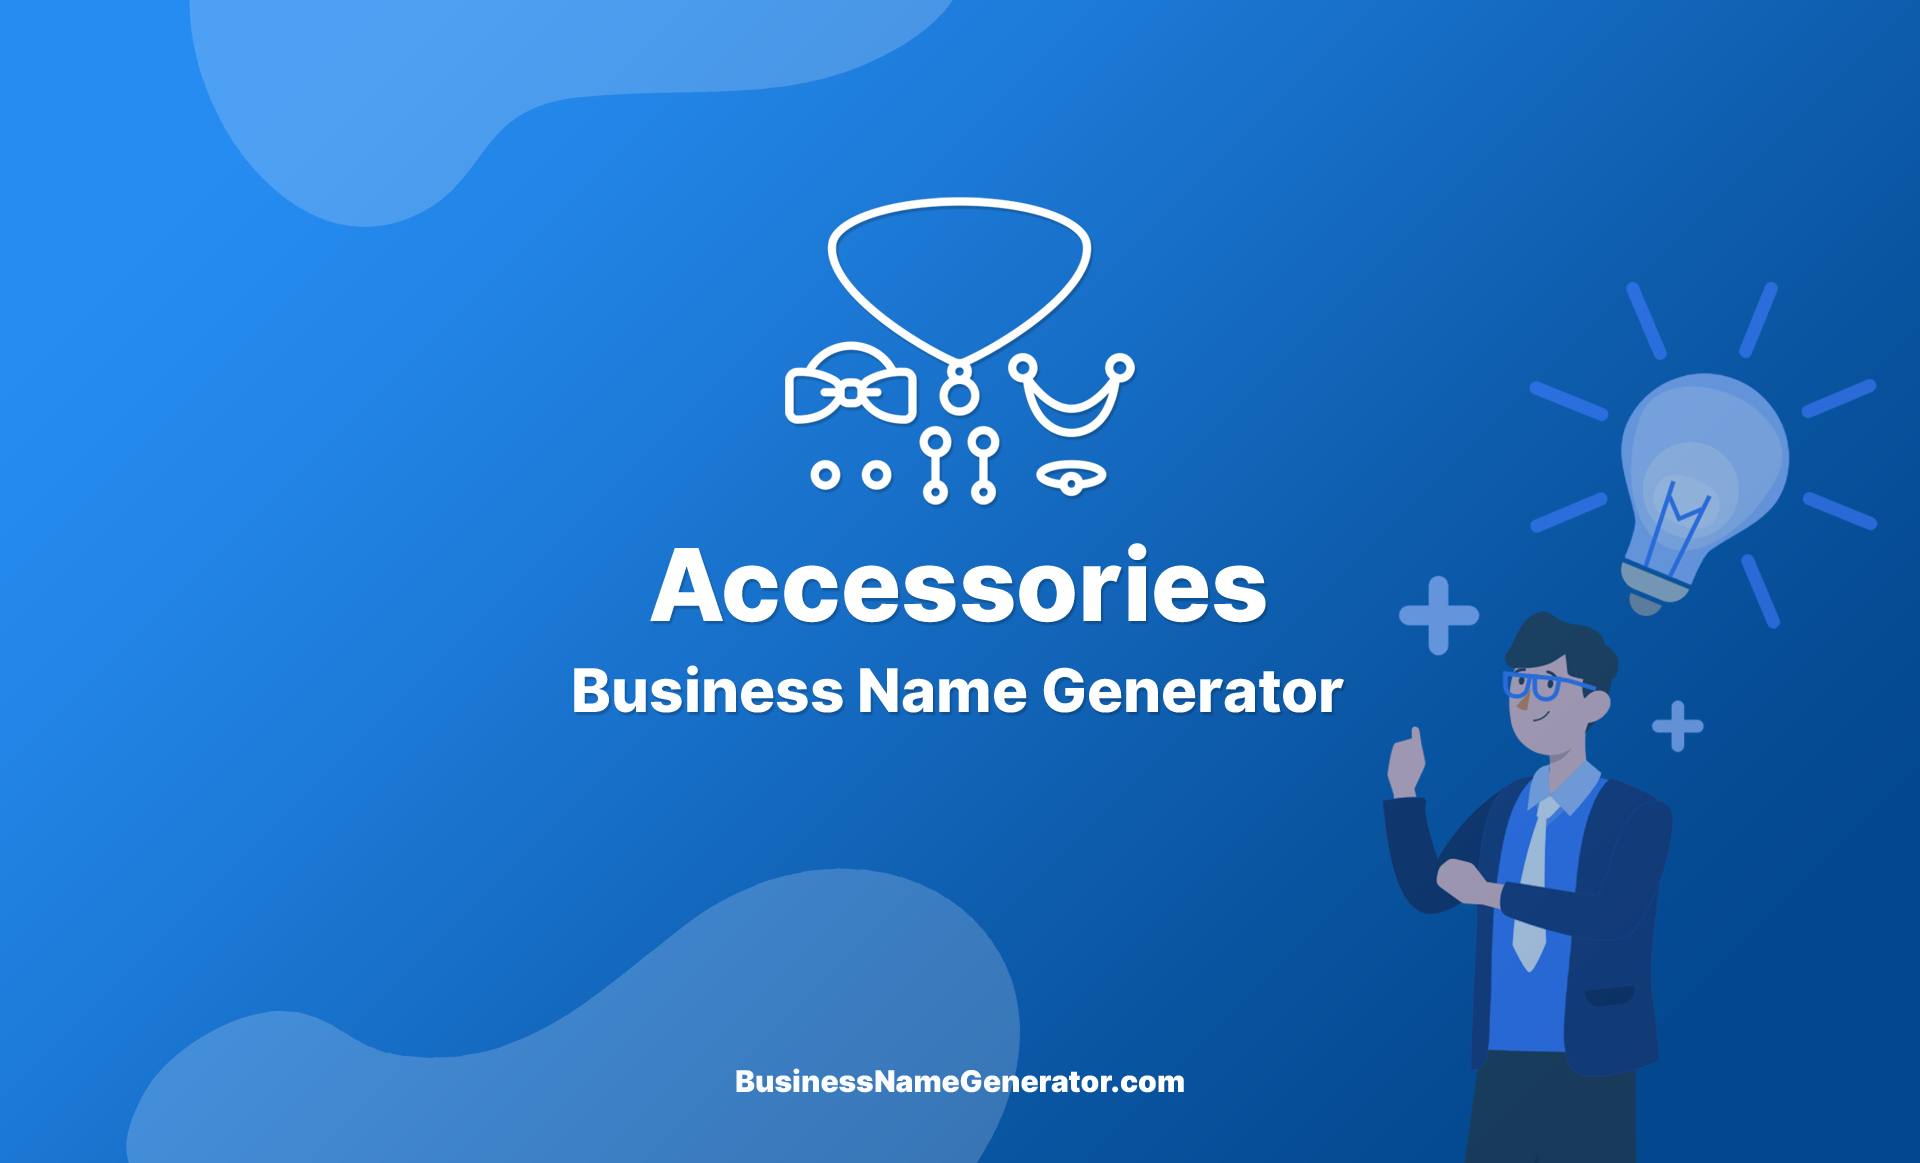 Accessories Business Name Generator